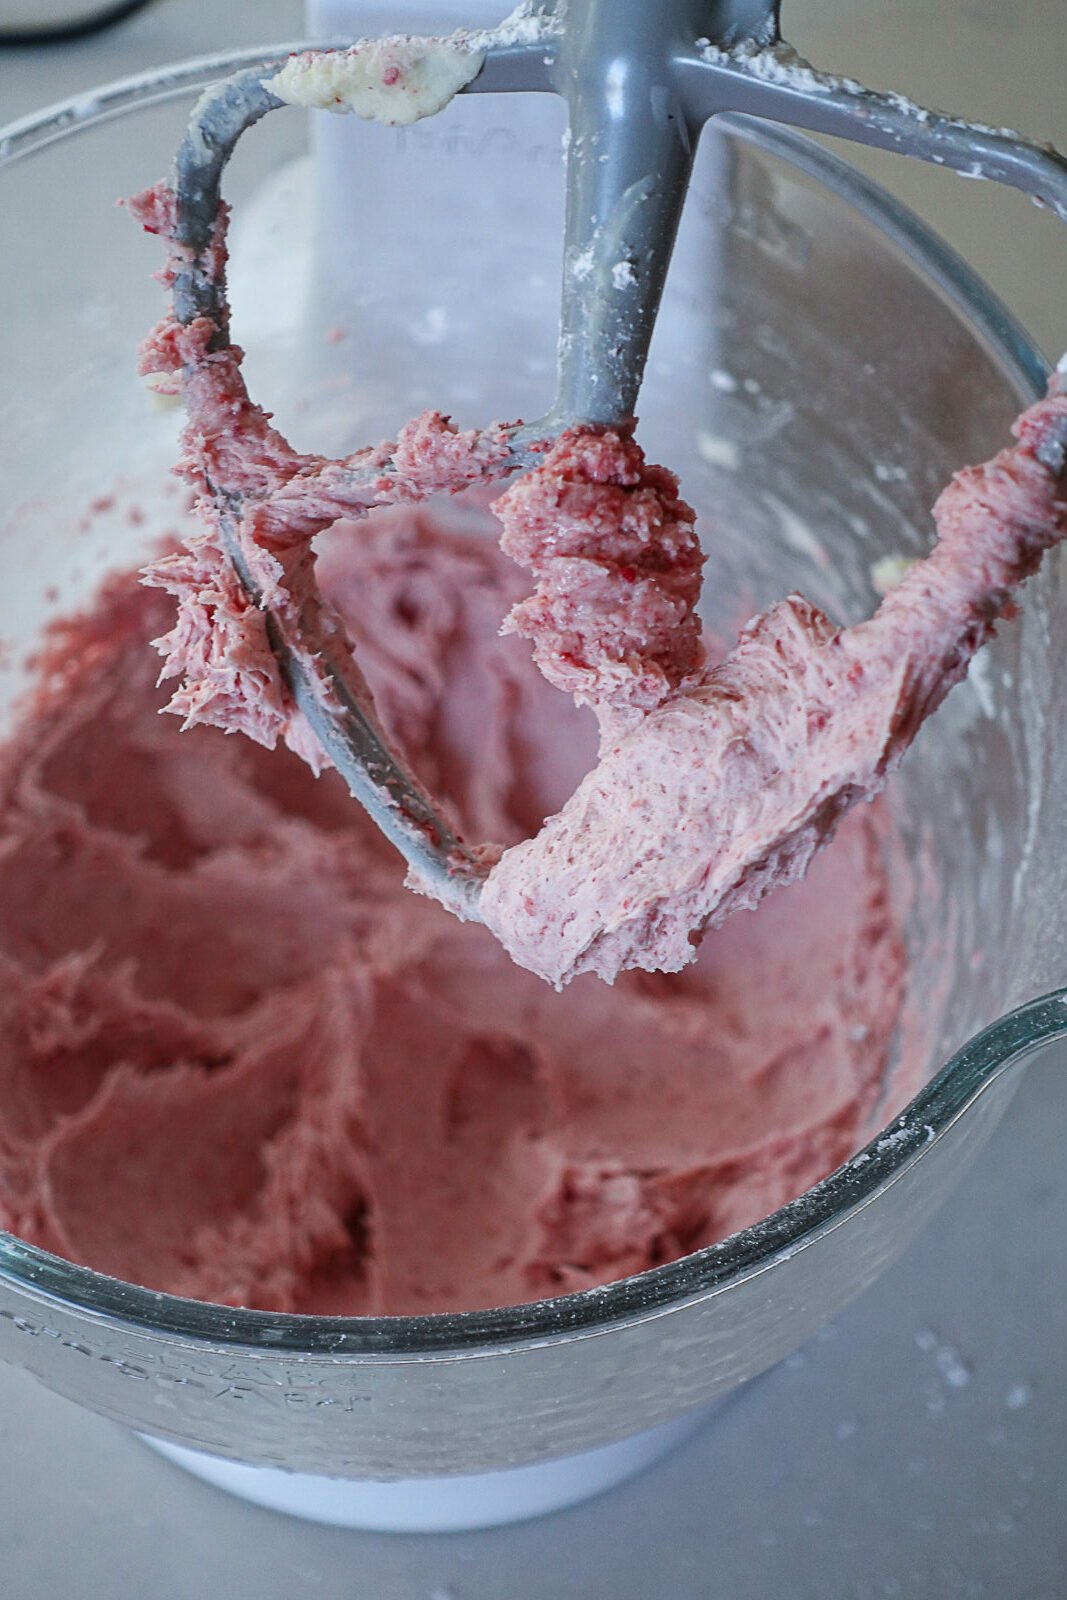 Homemade Pink Frosting in a Kitchenaid Stand Mixer